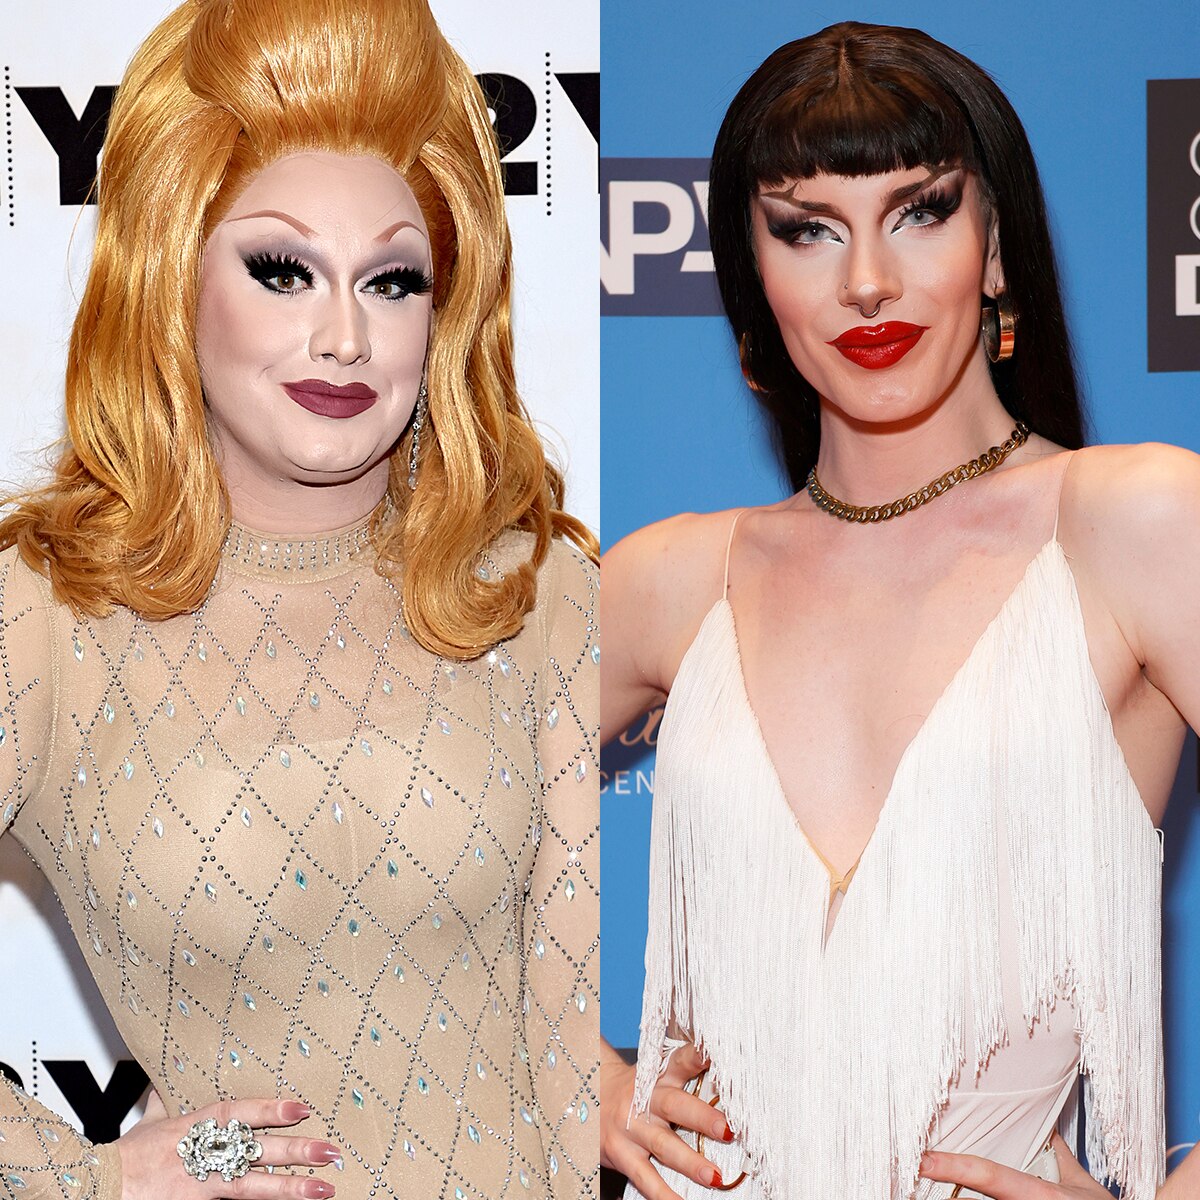 Jinkx Monsoon and Willow Pill